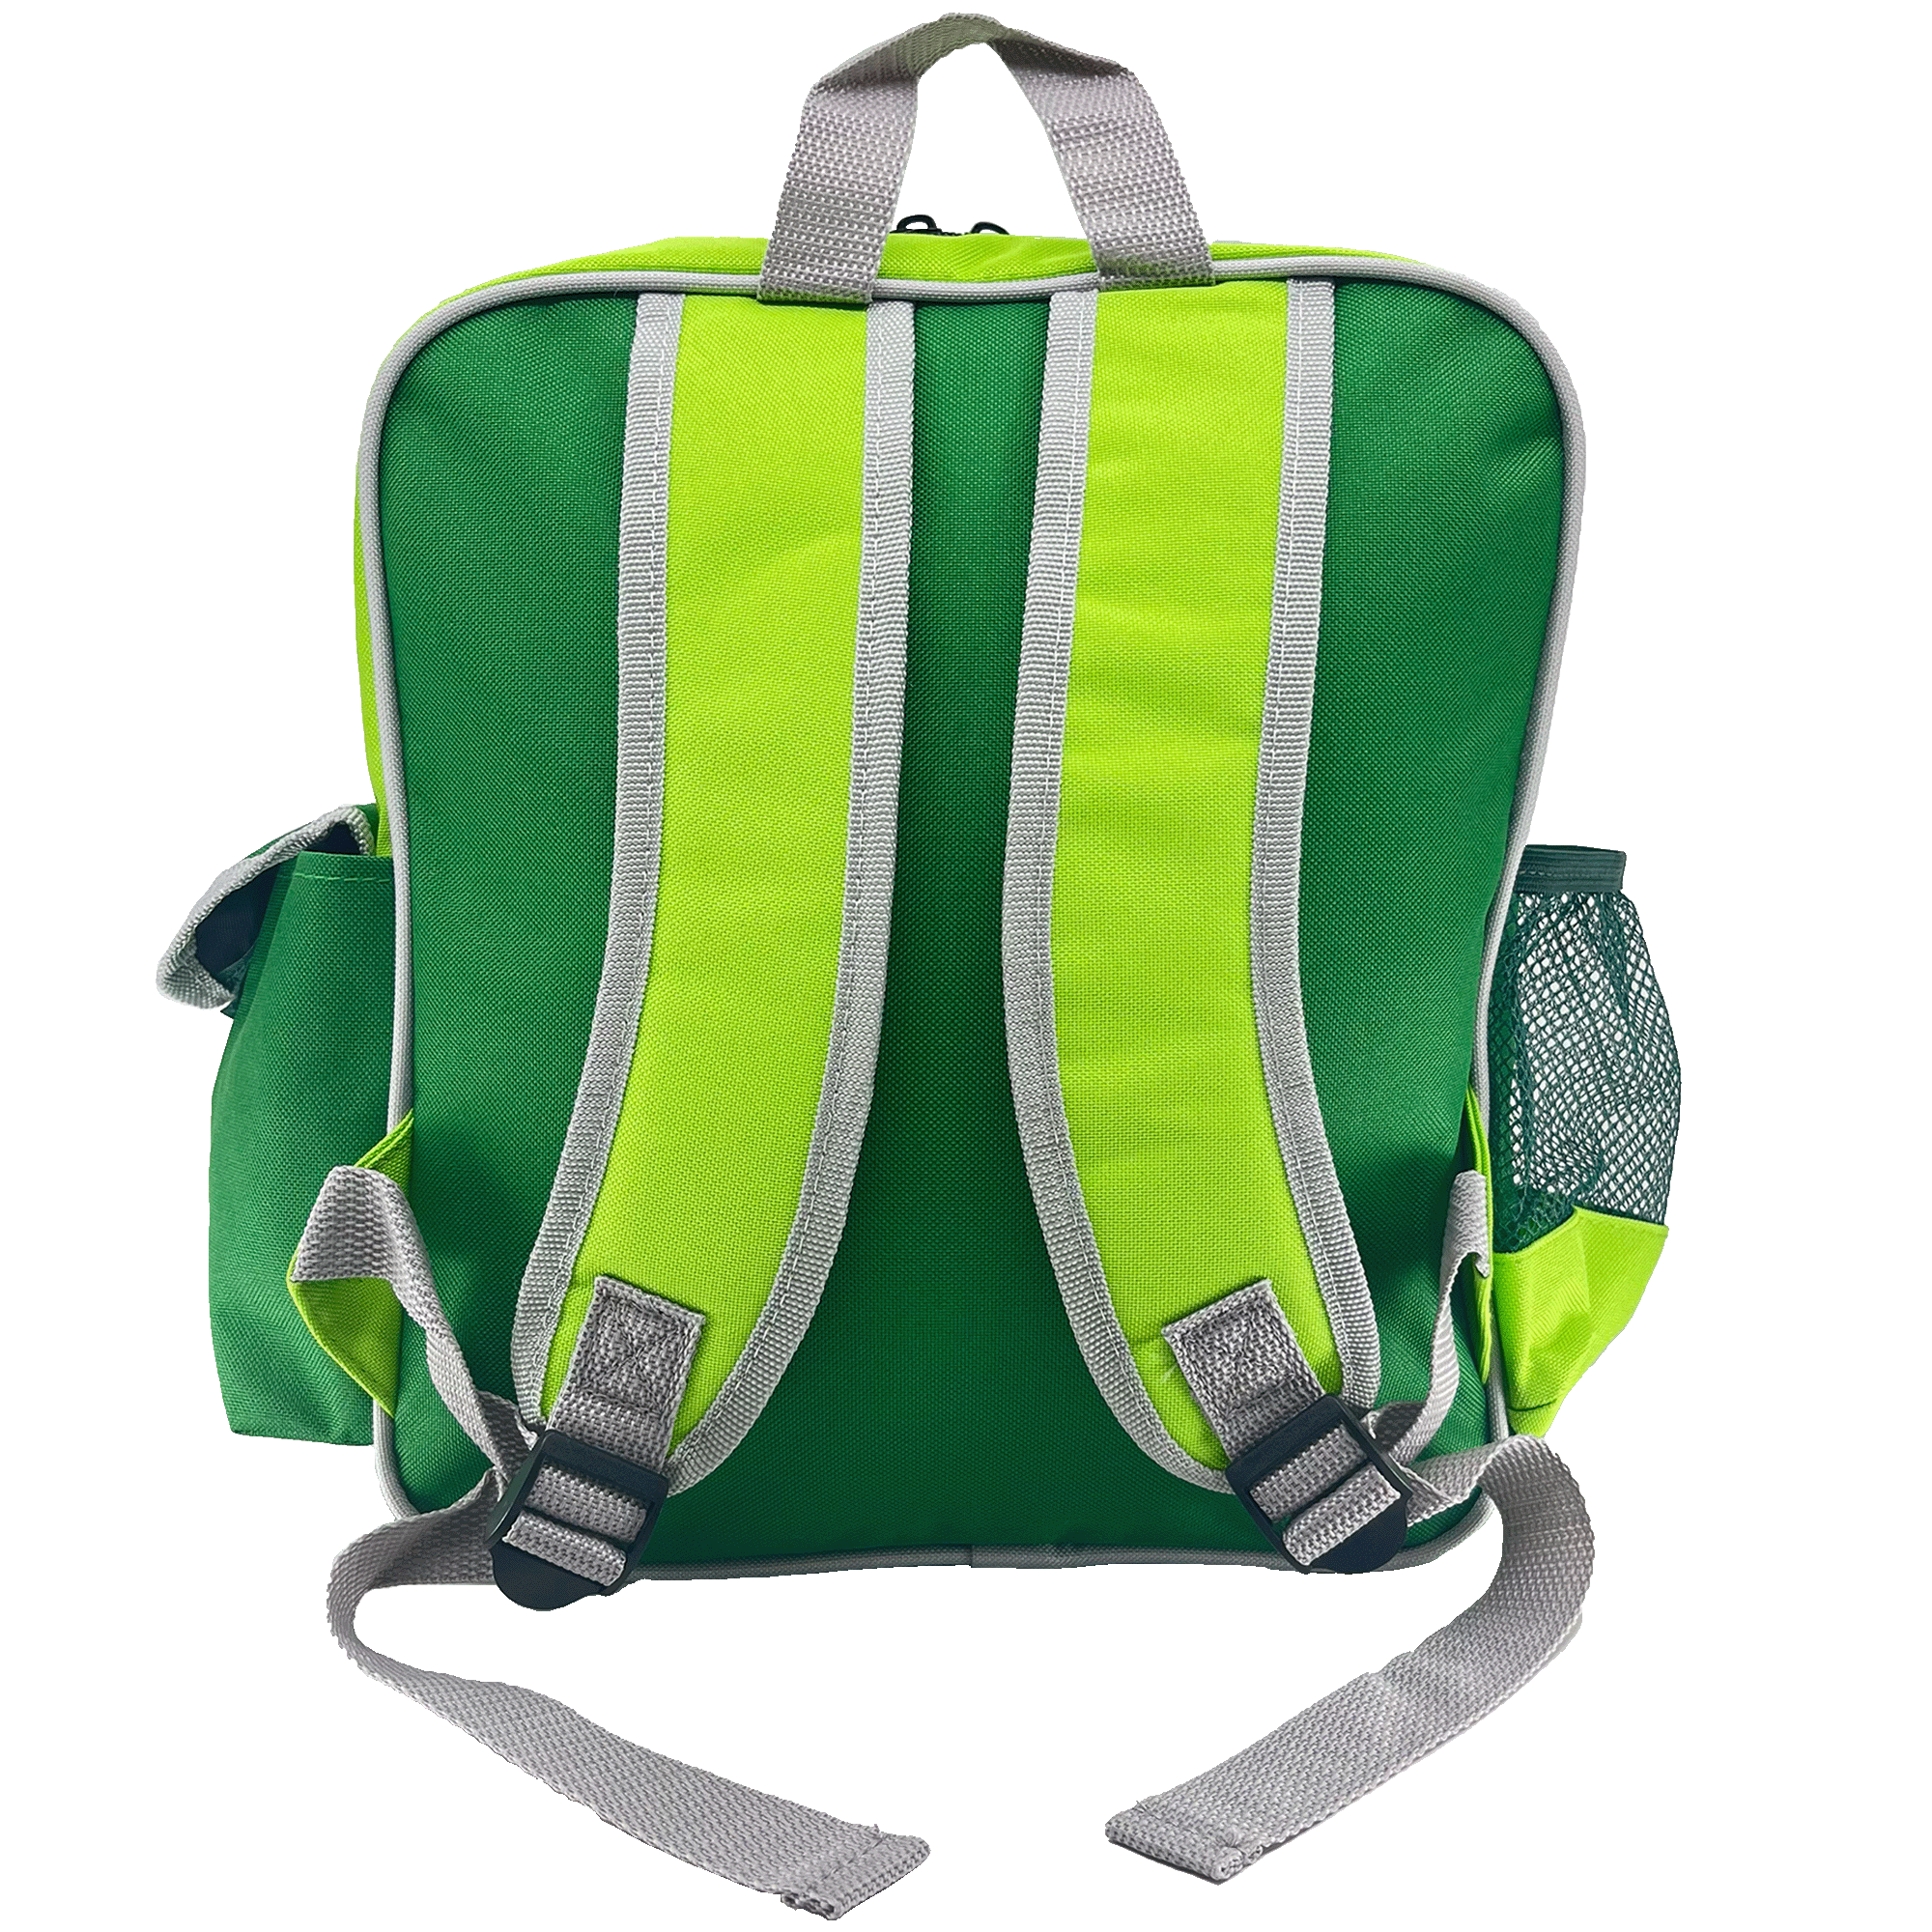 The backside of a primary school backpack in green, and grey with two side pouches.